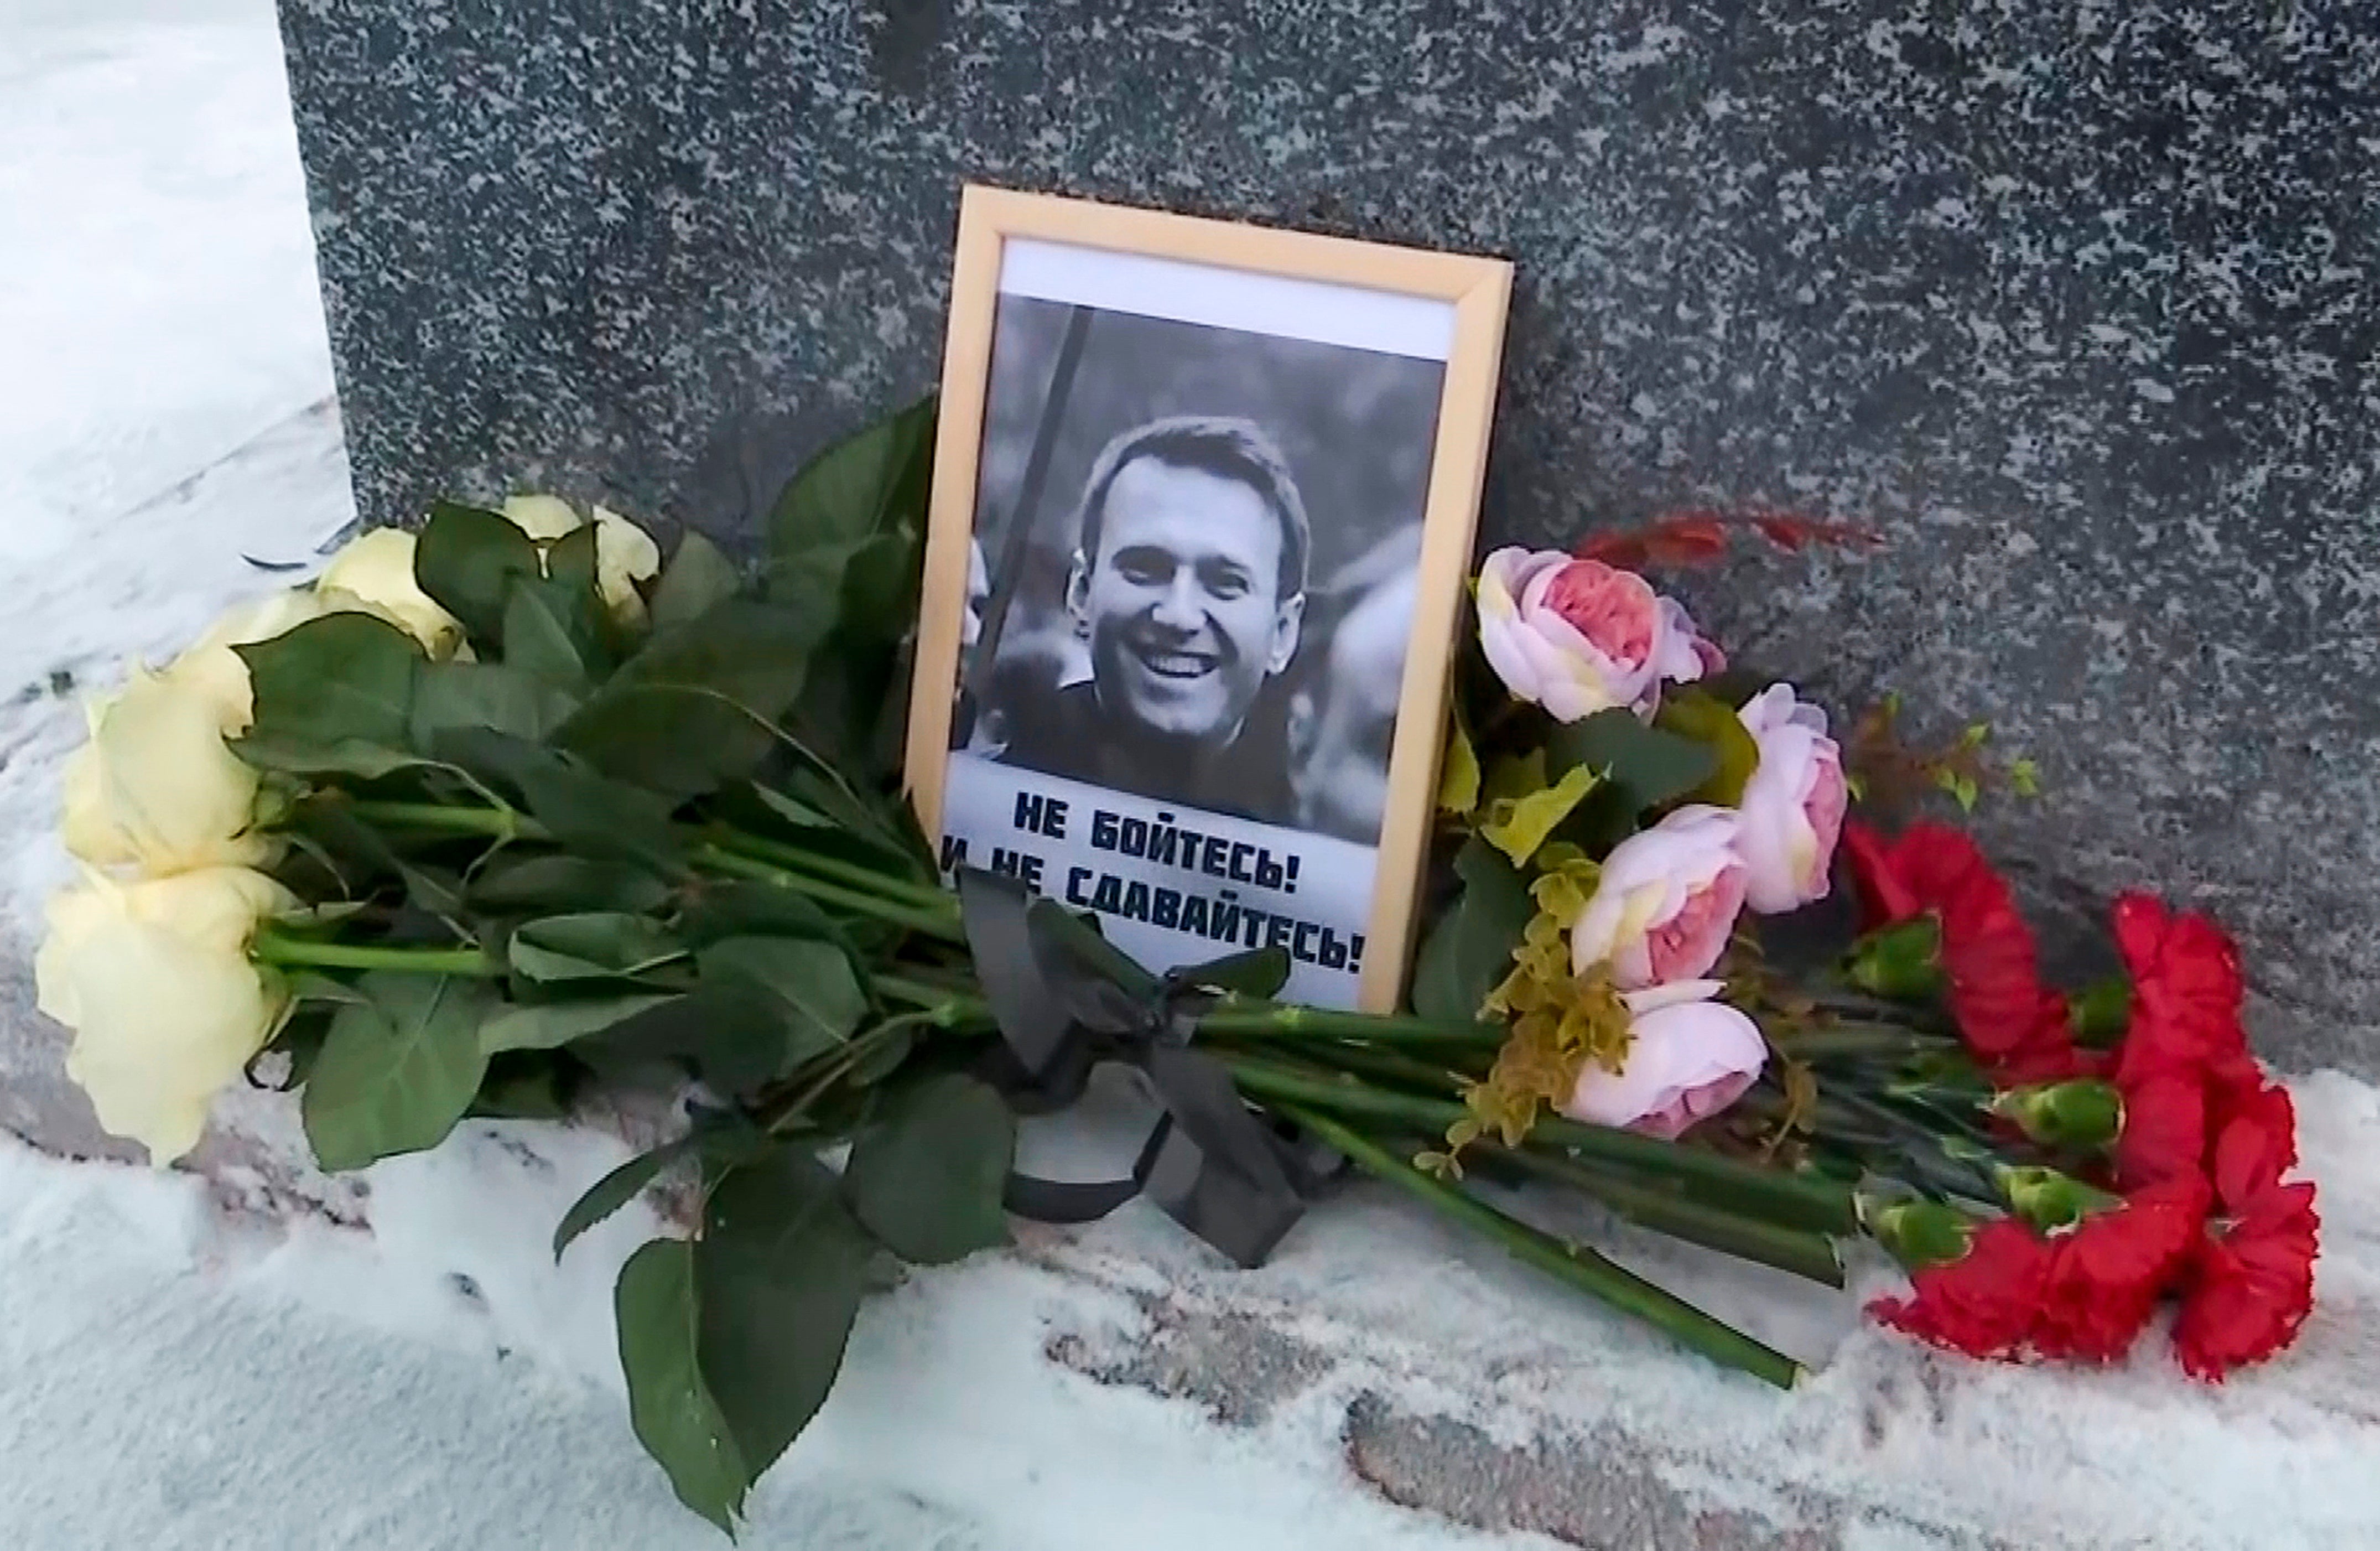 Tens of thousands have written to demand Navalny’s body is returned to his family